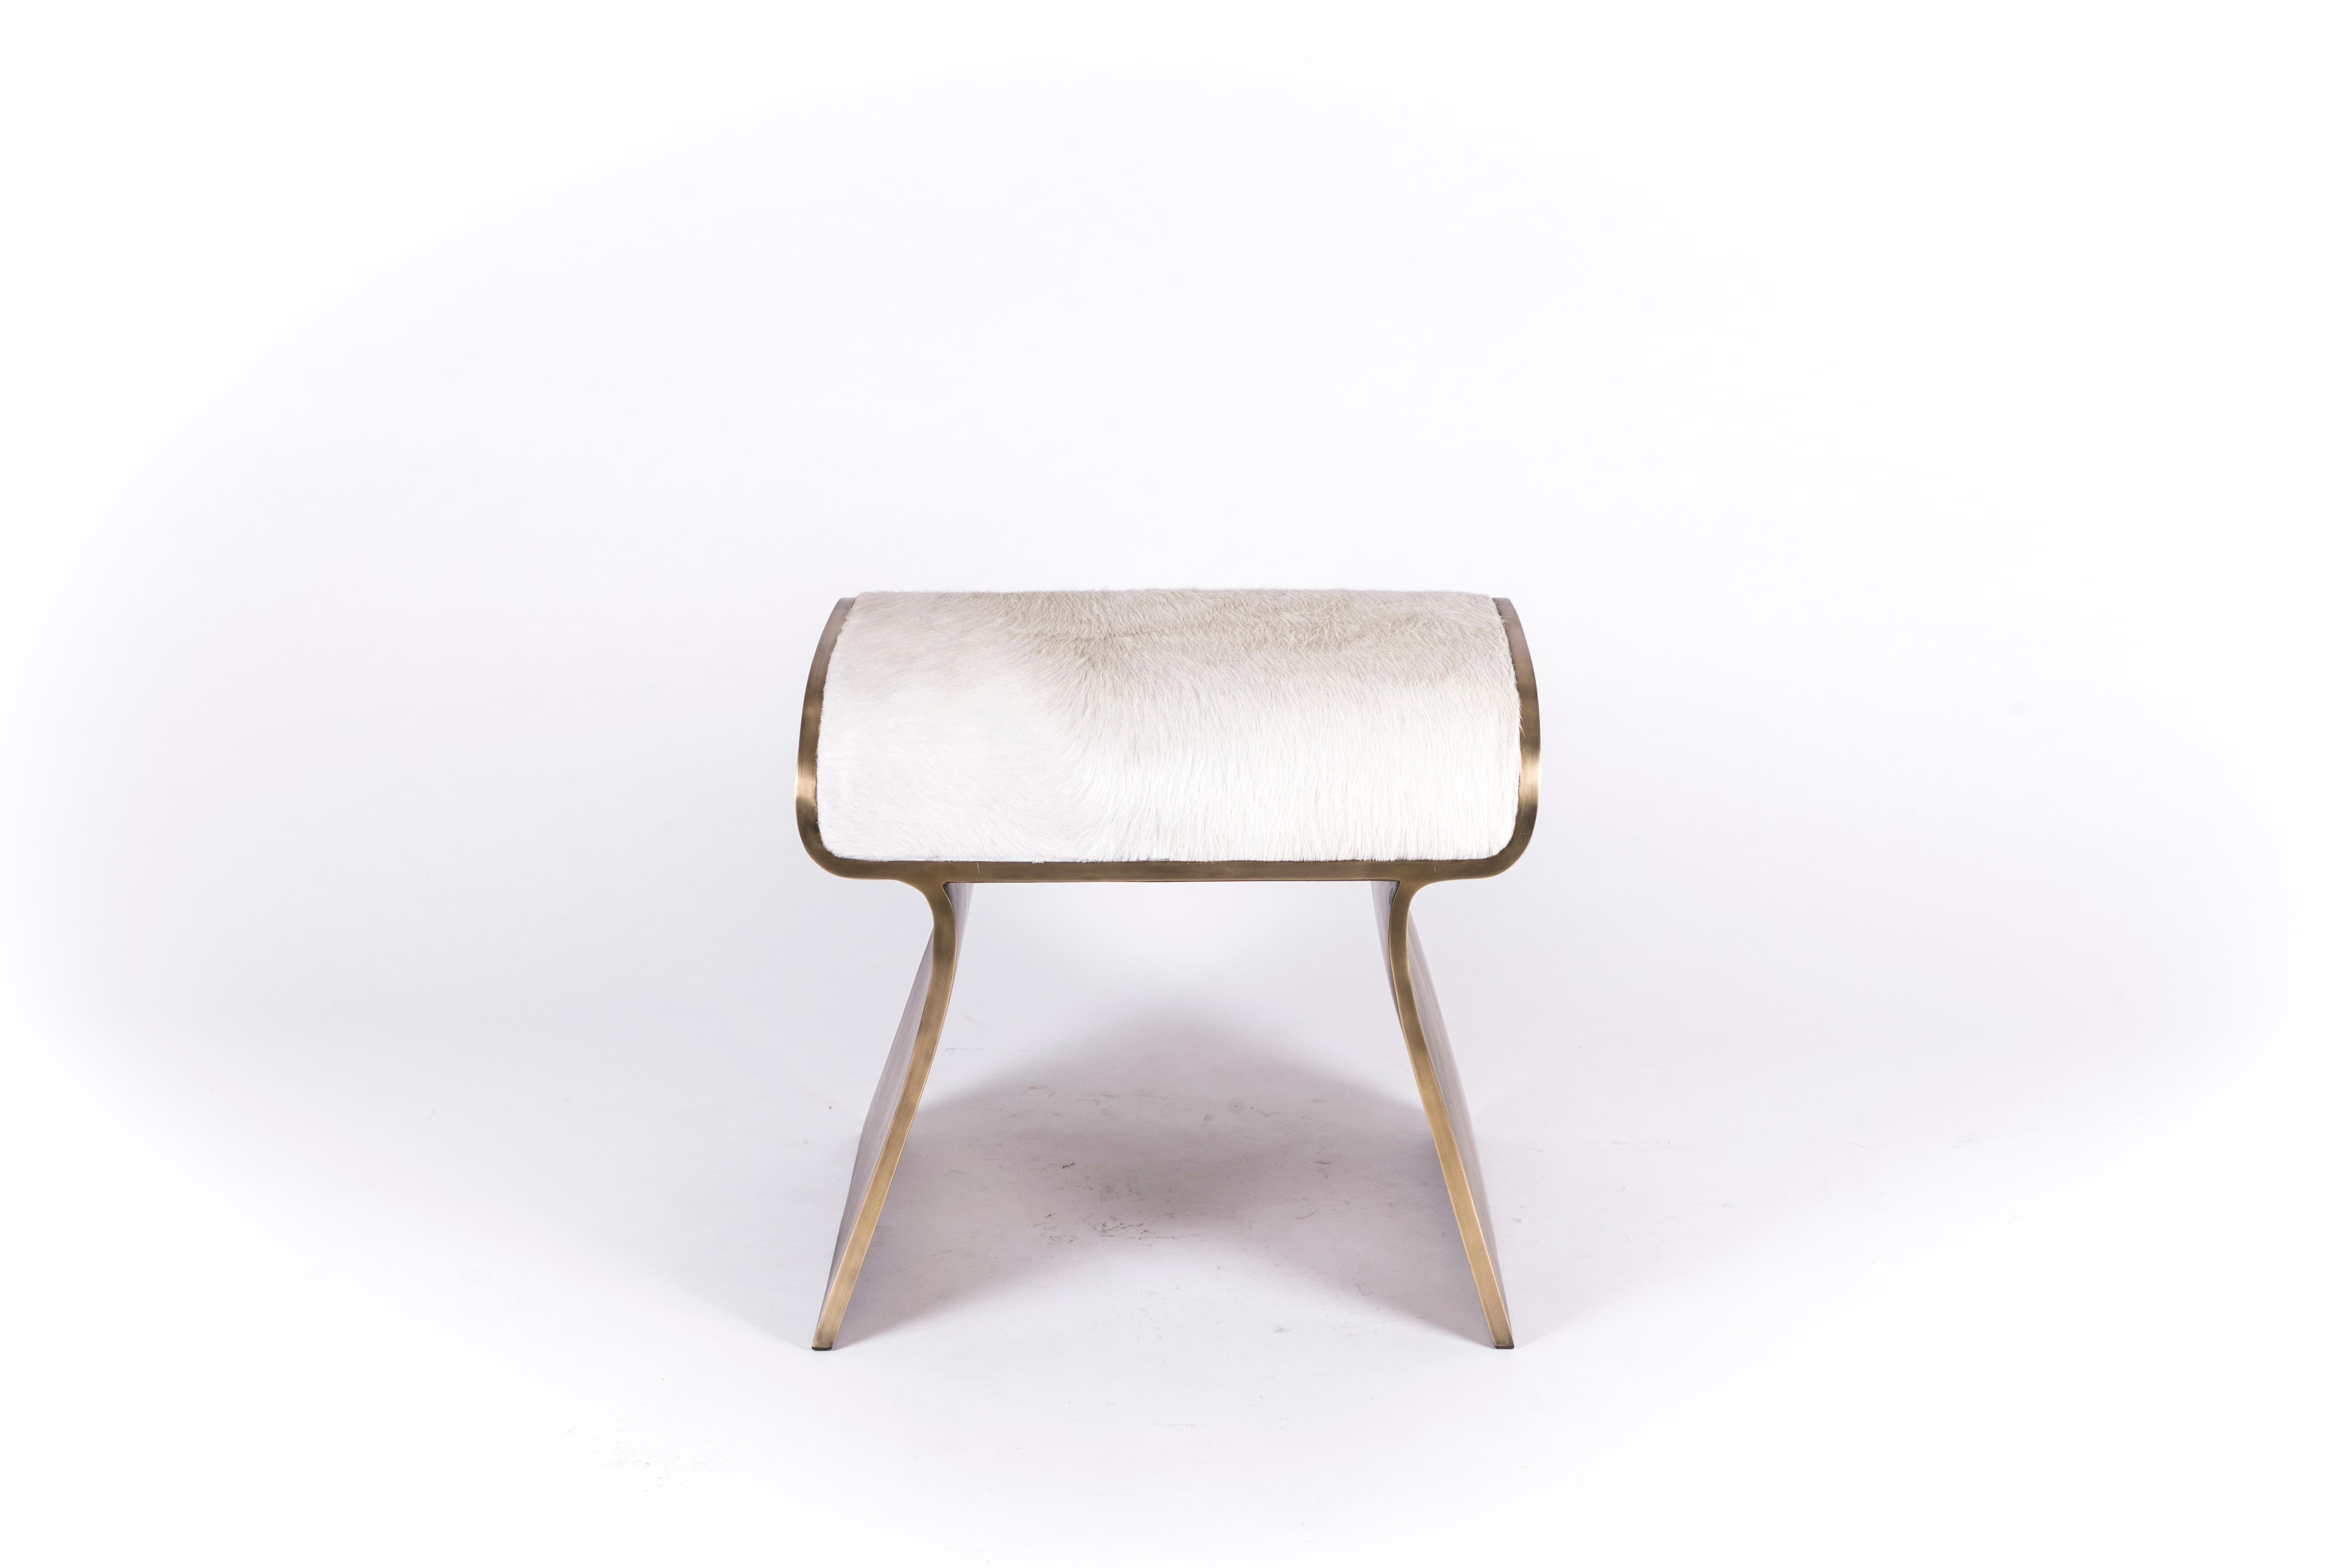 Shagreen Stingray Dandy Side Table in Cream Shagreen and Bronze-Patina Brass by Kifu, Paris For Sale